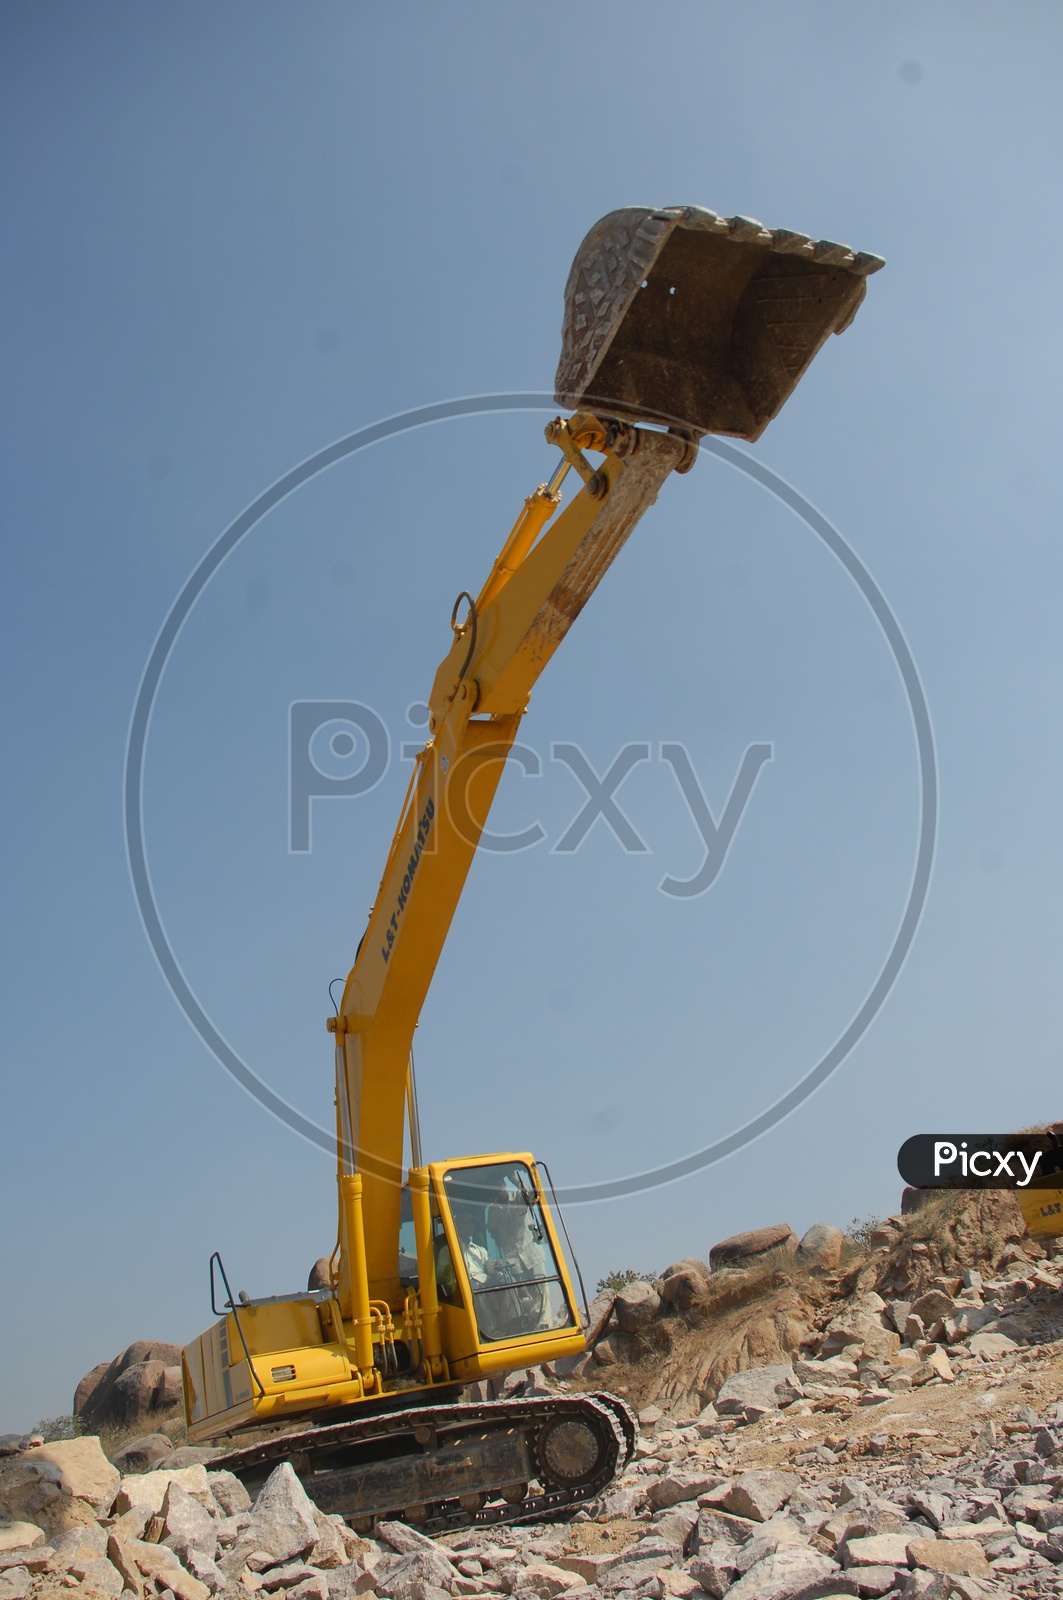 Bucket of the bulldozer excavating the rocks at a construction site